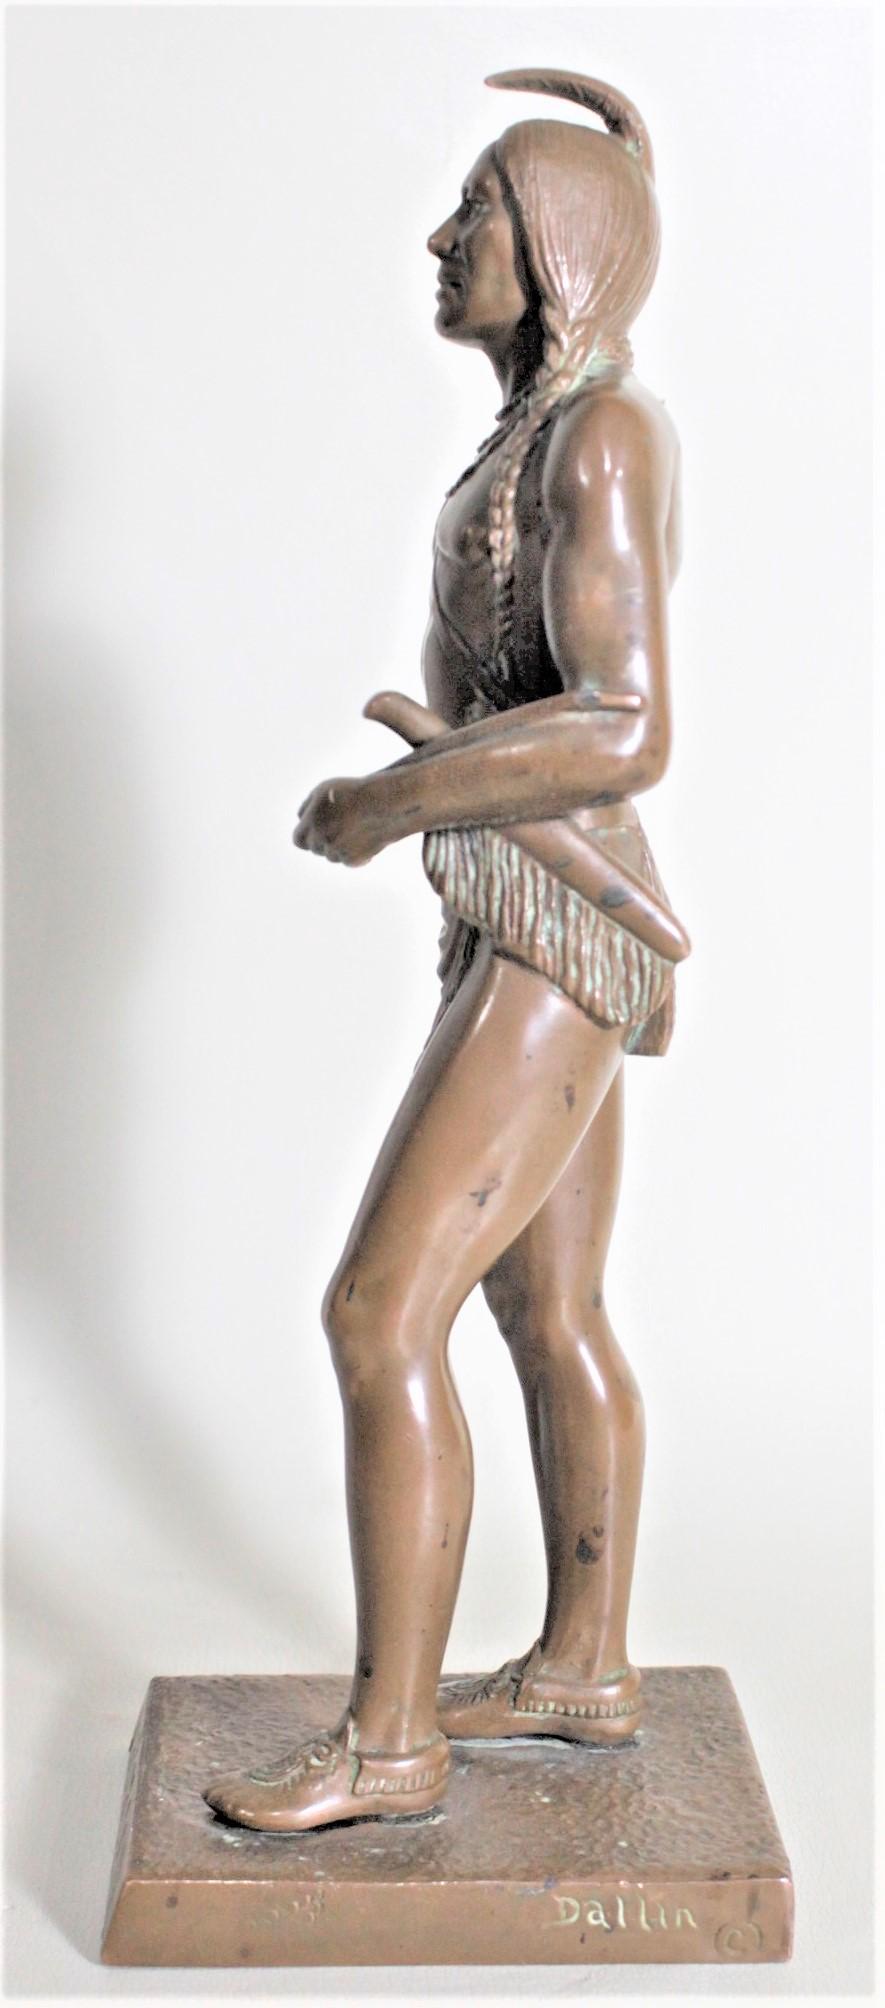 American Classical Antique Signed Cyrus Dallin Bronze Sculpture of the Indigenous Chief Massasoit